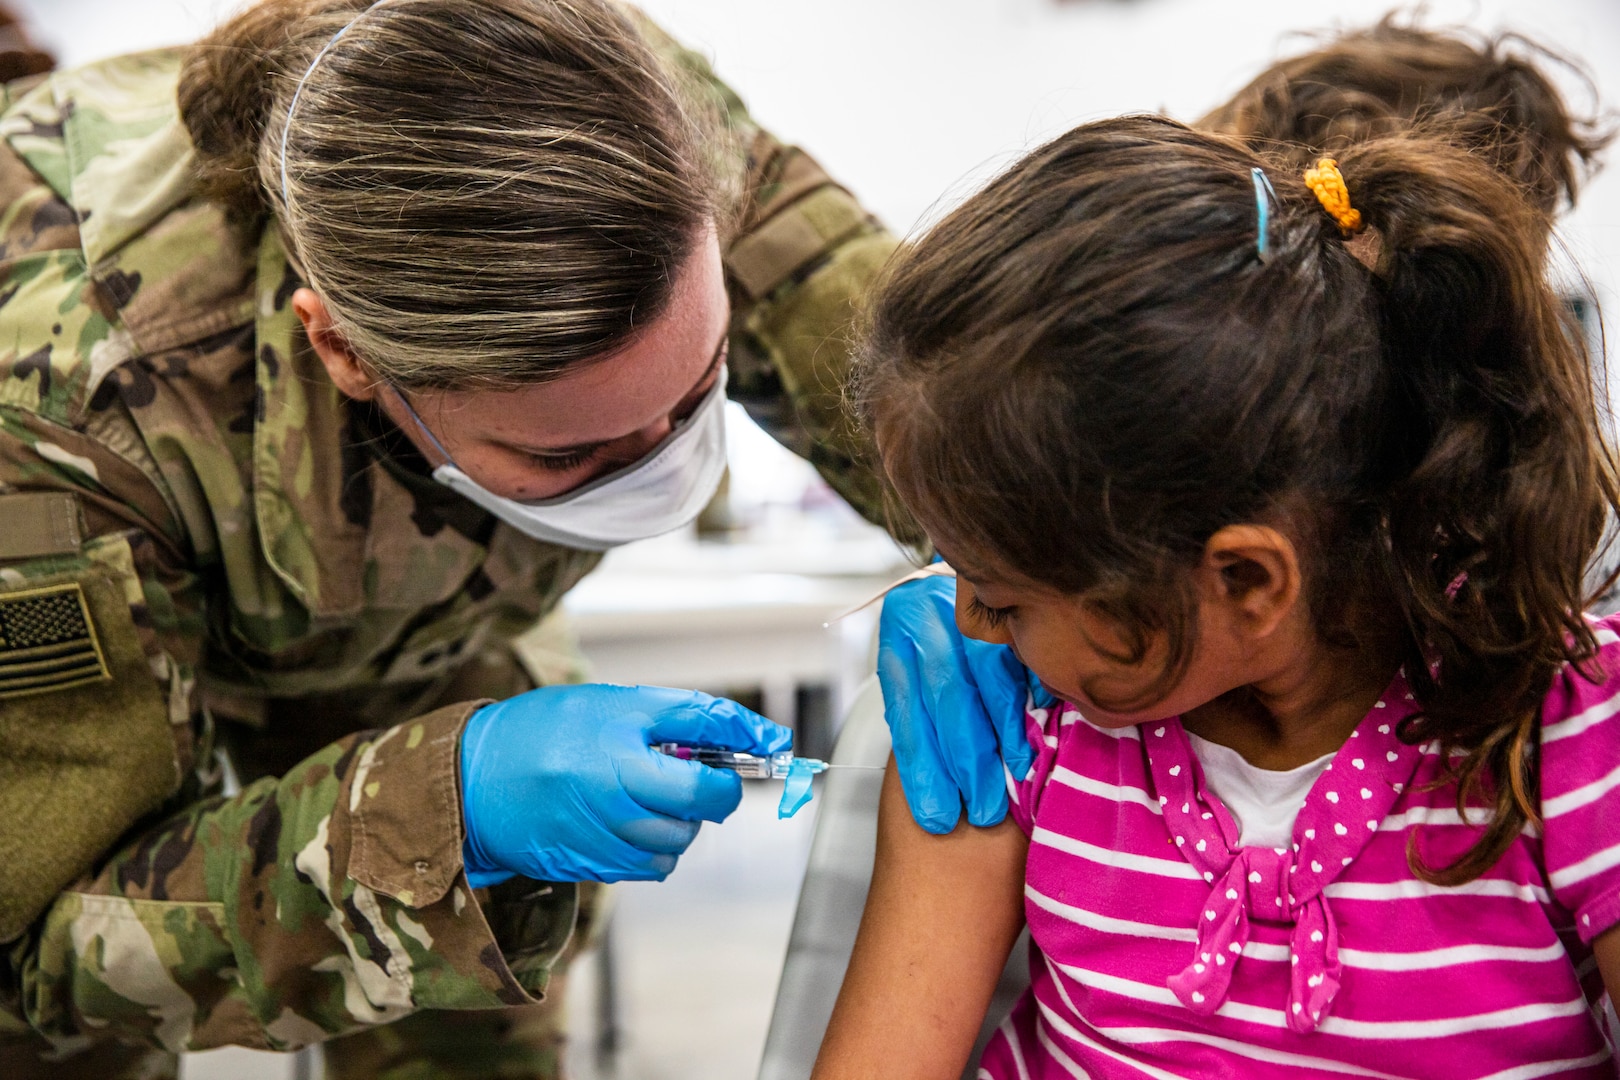 U.S. Army Capt. Breanna Alis, attached to 10th Field Hospital, Task Force McCoy, vaccinates an Afghan evacuee during a mass vaccination campaign at Fort McCoy, Wisconsin, Sept. 16, 2021, as part of Operation Allies Welcome. The Department of Defense, through U.S. Northern Command, and in support of the Department of Homeland Security, is providing transportation, temporary housing, medical screening, and general support for at least 50,000 Afghan evacuees at suitable facilities, in permanent or temporary structures, as quickly as possible. This initiative provides Afghan personnel essential support at secure locations outside Afghanistan. (U.S. Army photo by Spc. Rhianna Ballenger, 55th Signal Company)